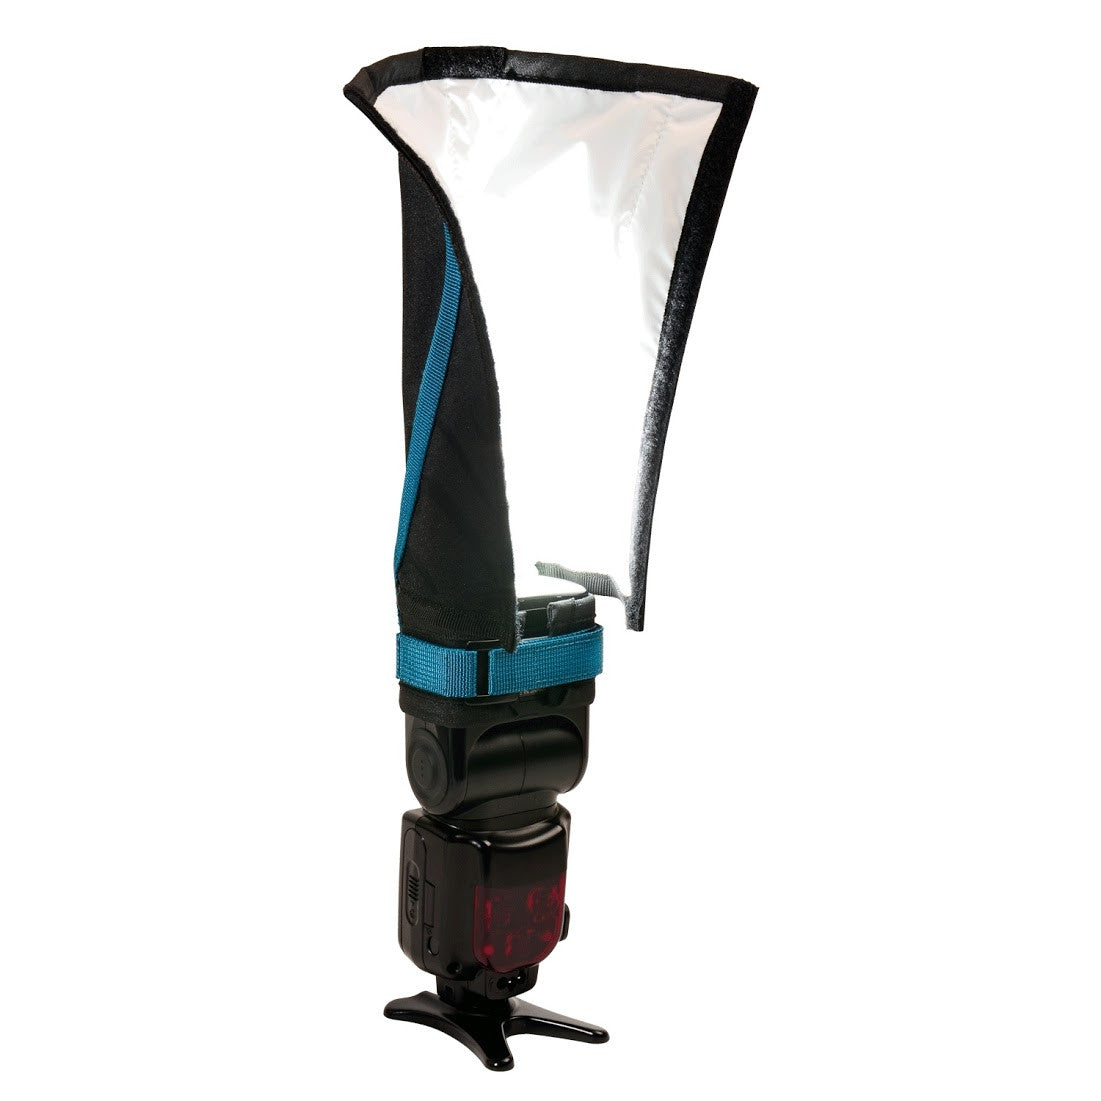 Rogue FlashBender 2 - Large Positionable Reflector, lighting diffusers, Rogue - Pictureline  - 6